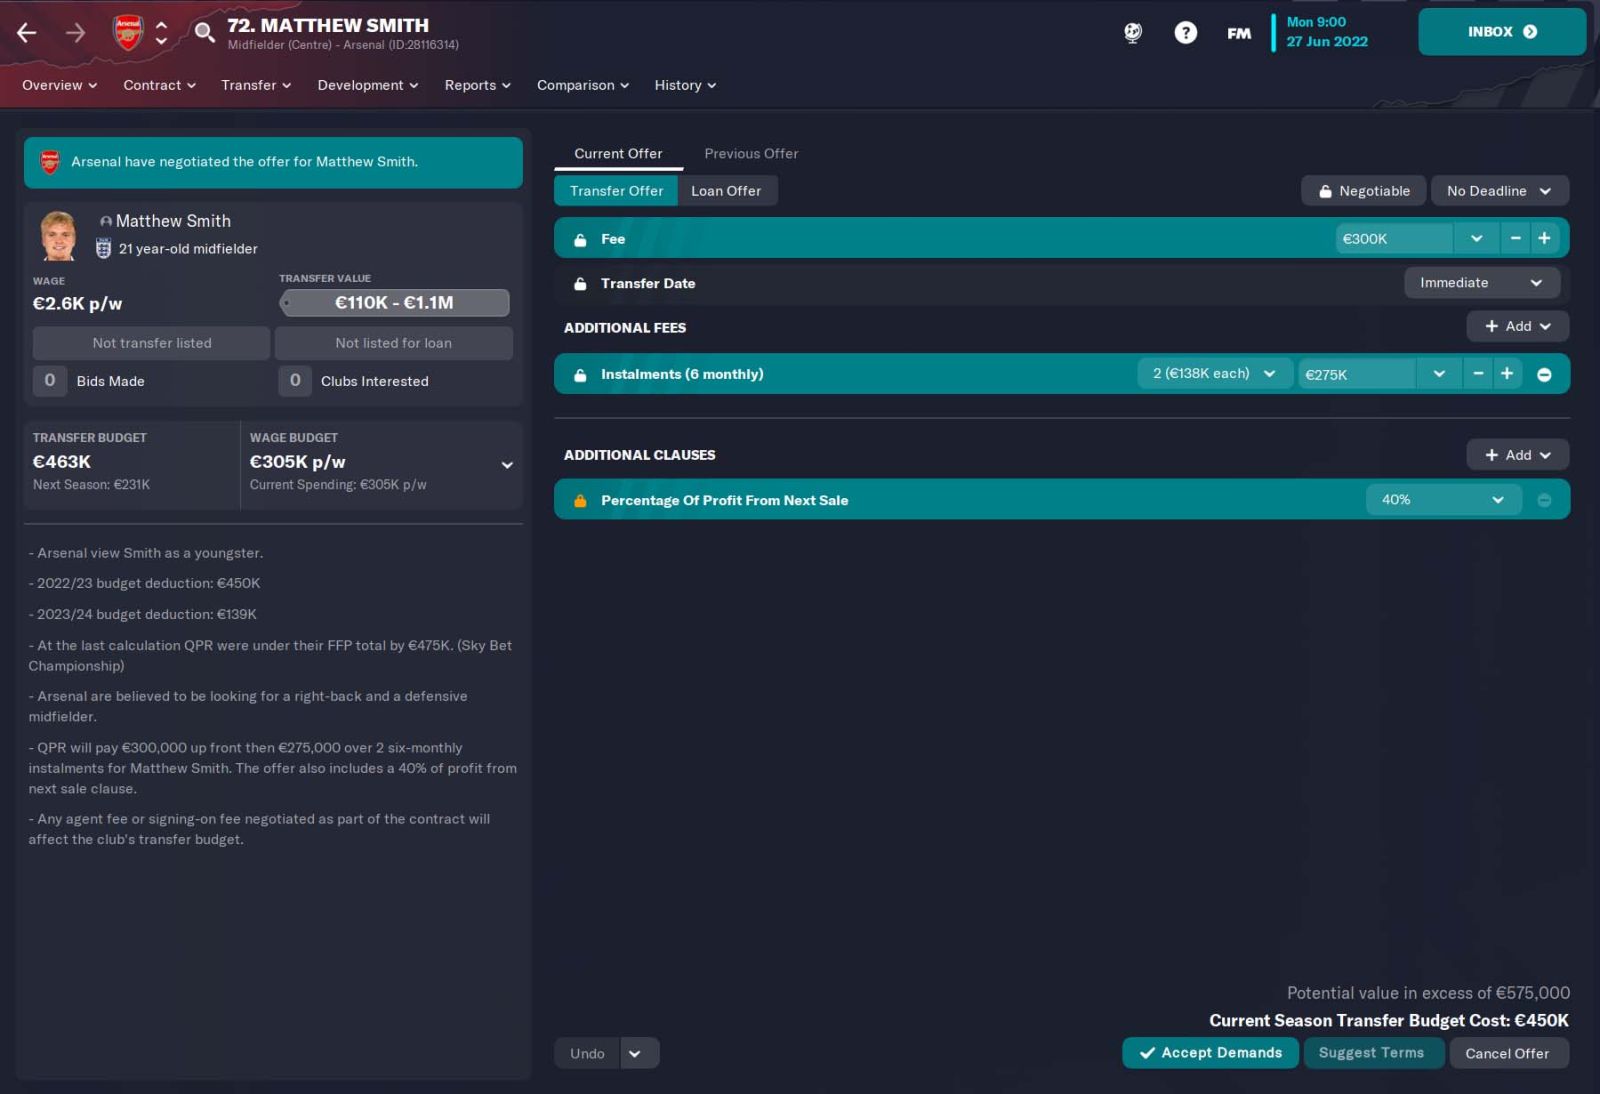 National League team want to hire Football Manager player as full